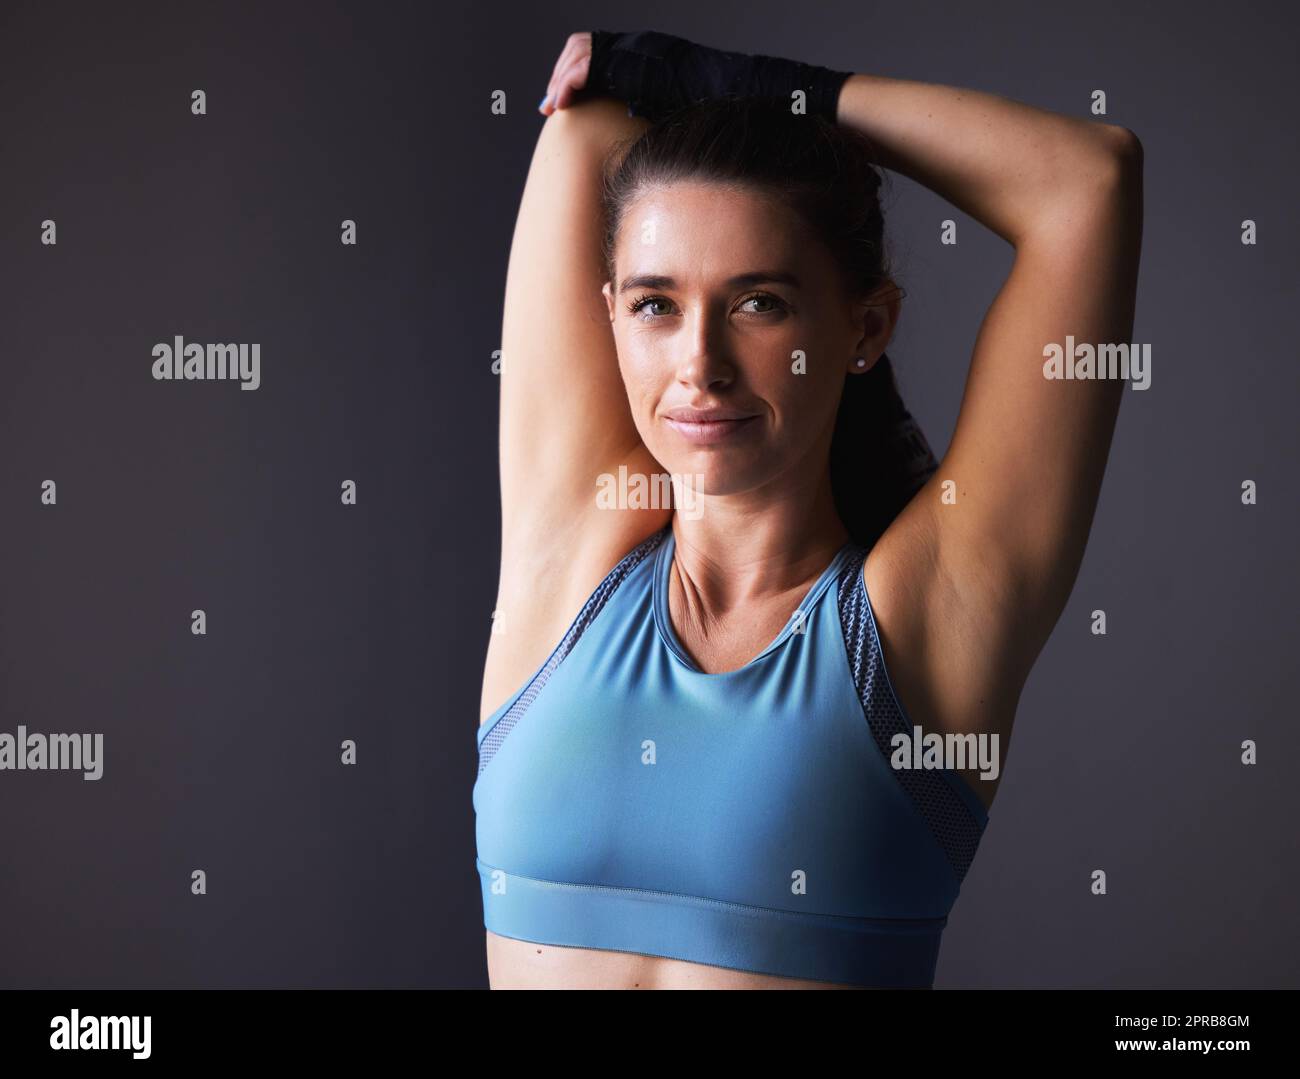 Im so ready to prove my strength. a young woman stretching her arms against a grey background. Stock Photo